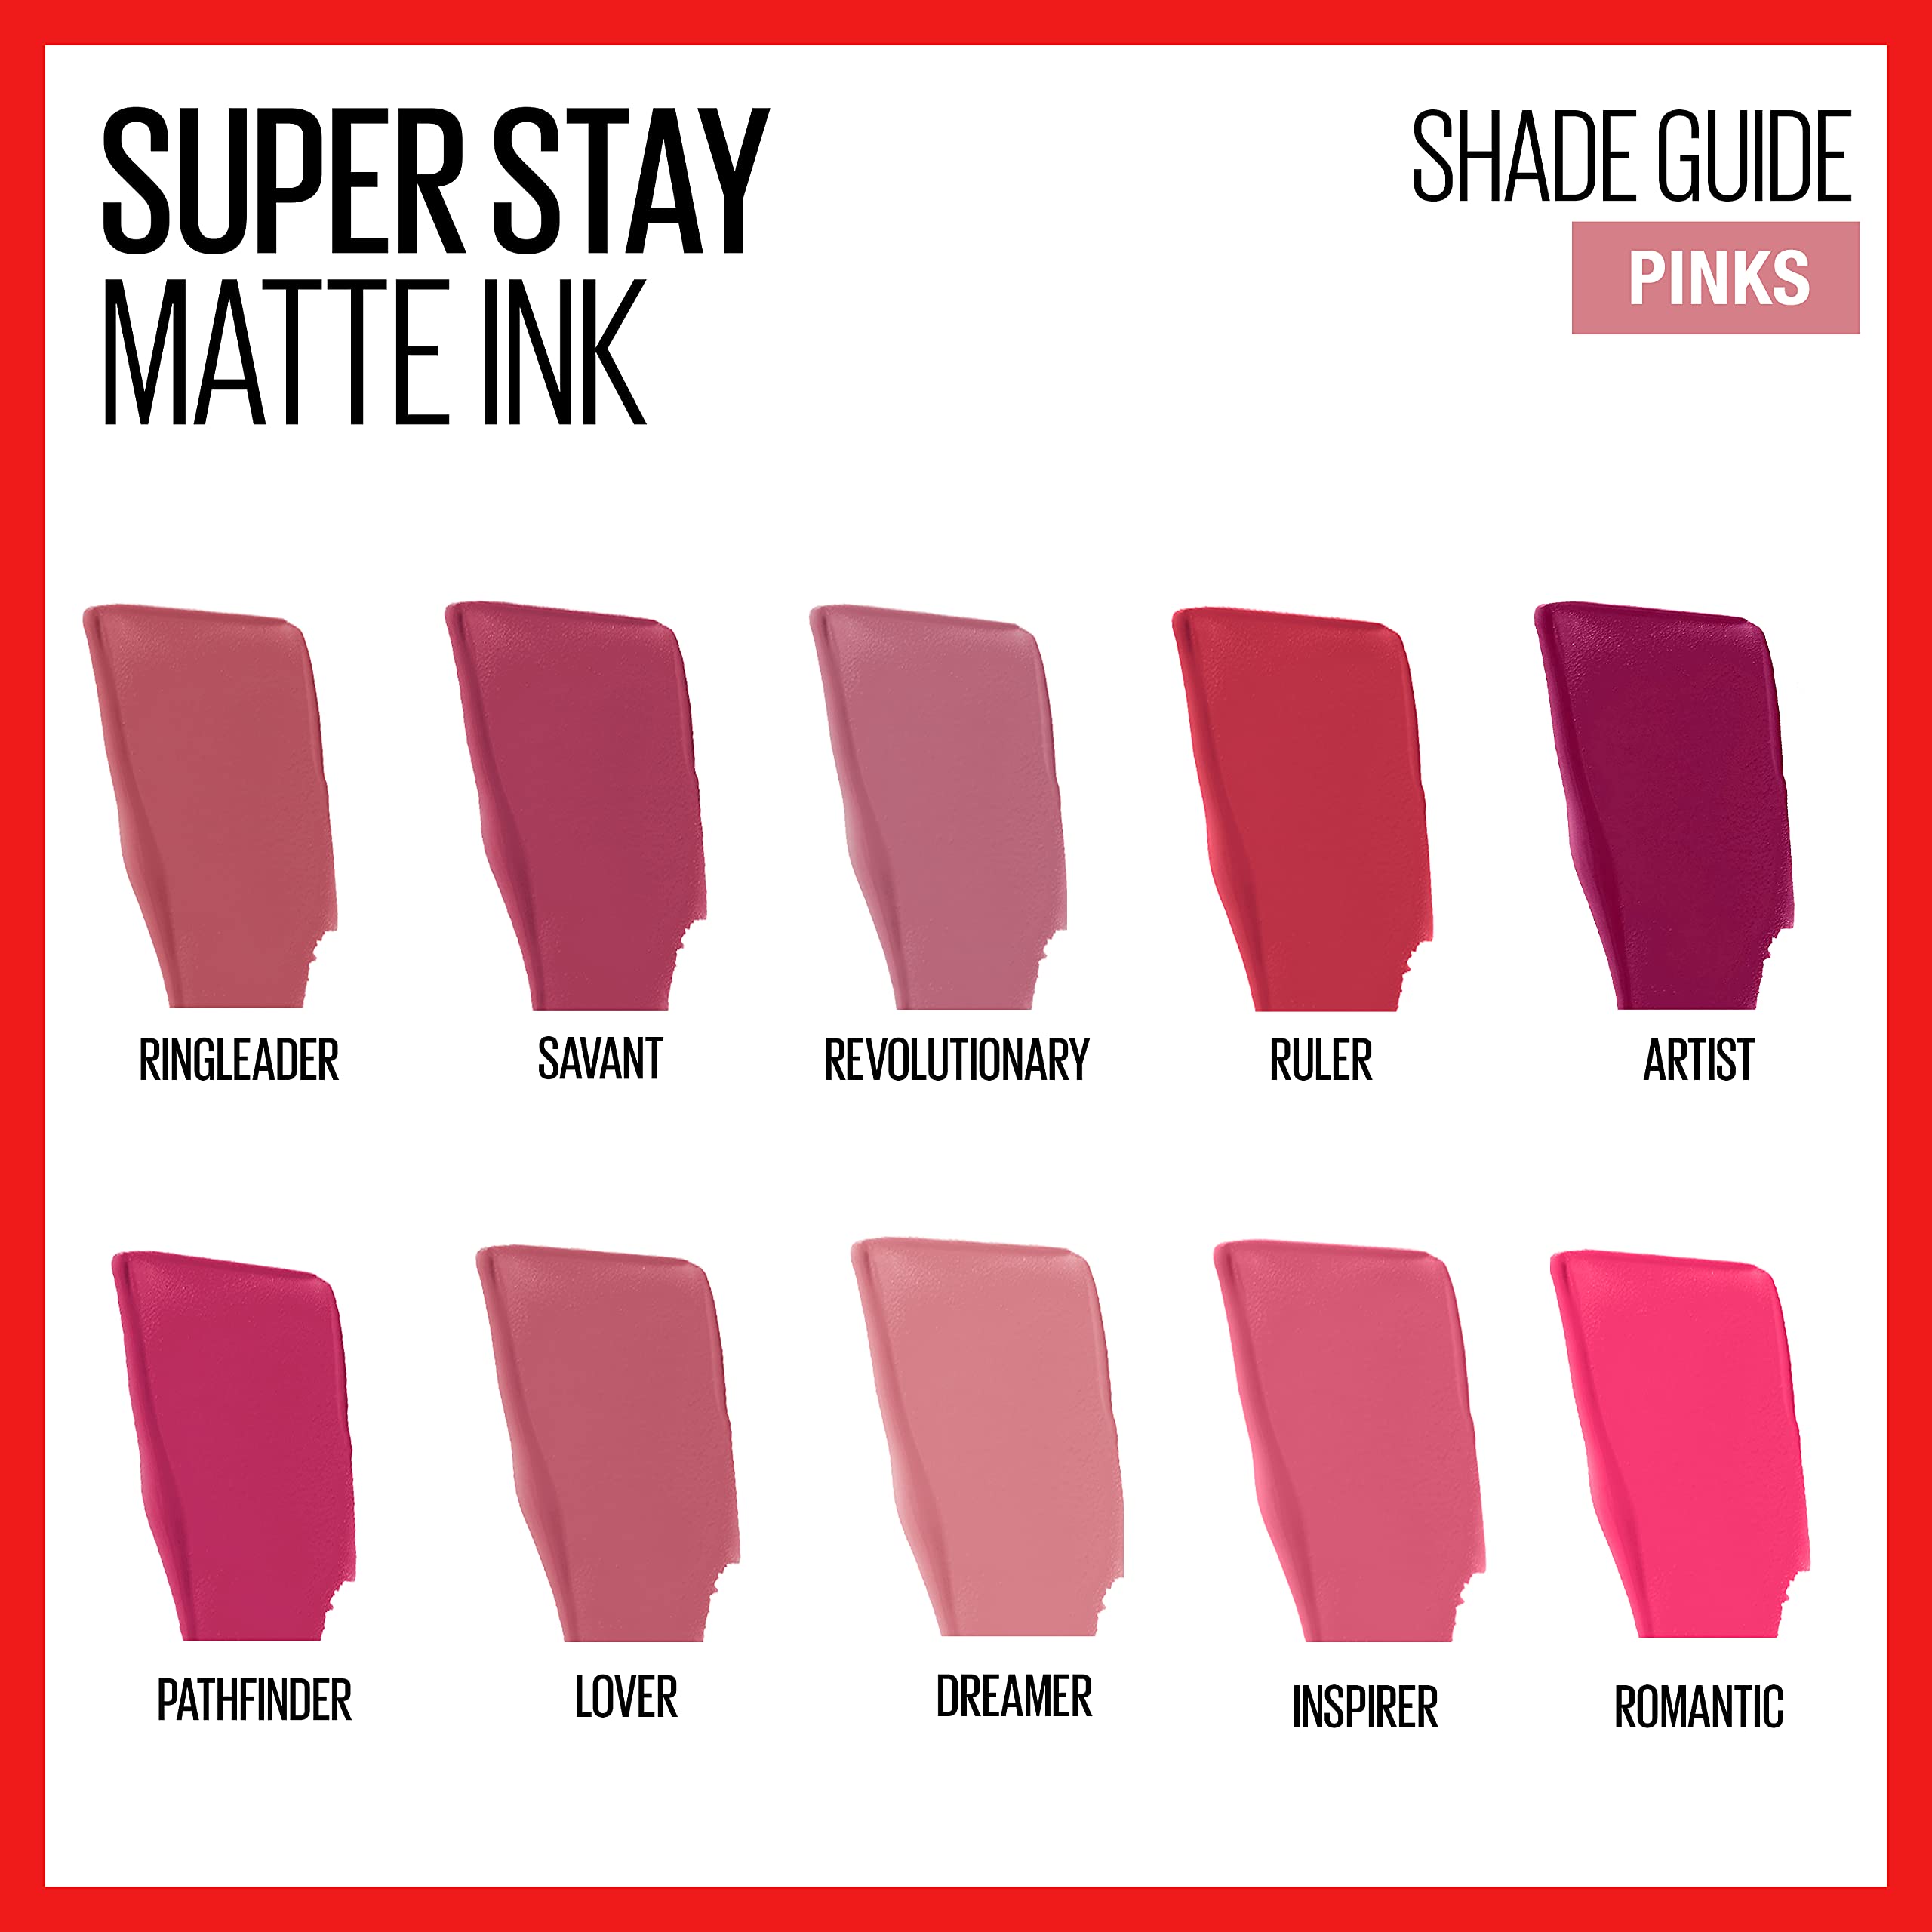 Maybelline New York Super Stay Matte Ink Liquid Lipstick Makeup, Long Lasting High Impact Color, Up to 16H Wear, Pathfinder, Berry Pink, 1 Count